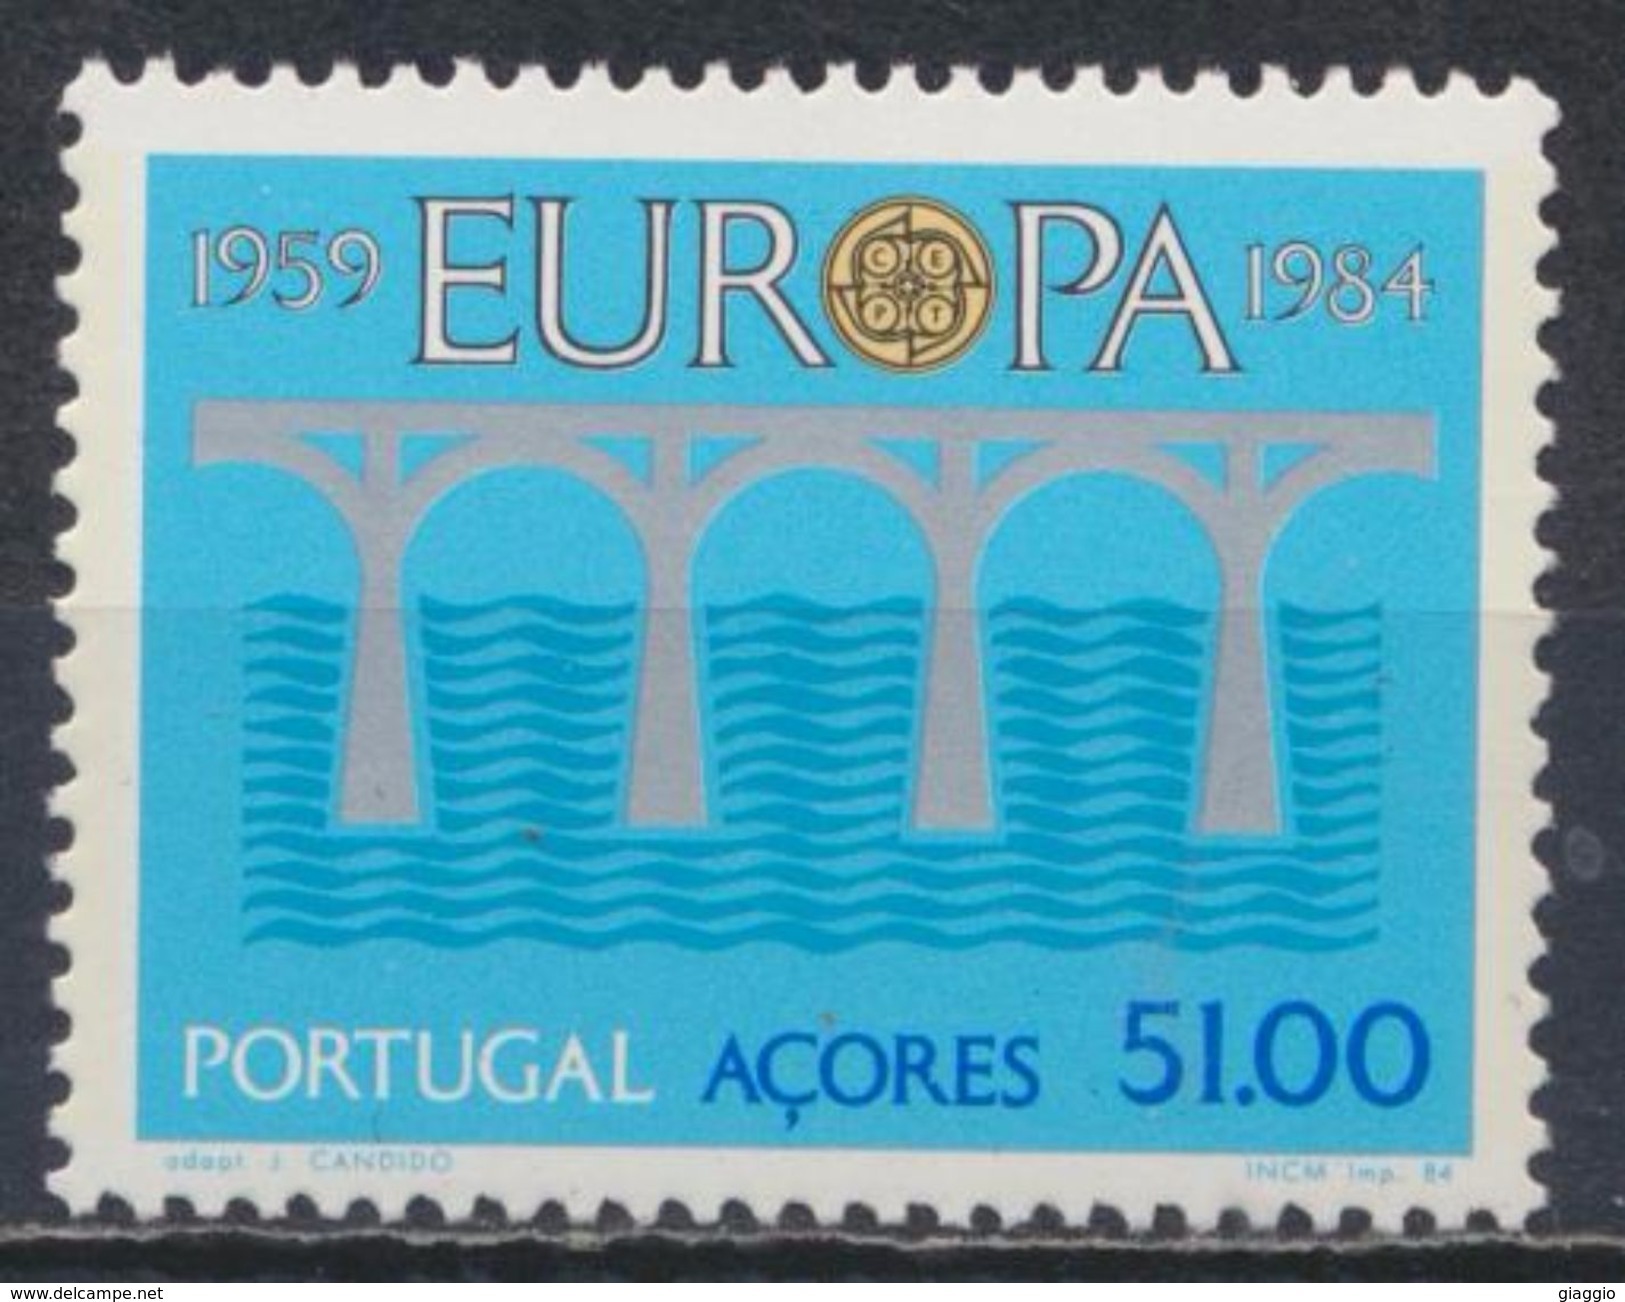 °°° PORTUGAL ACORES - Y&T N°353 - 1984 MNH °°° - Azores